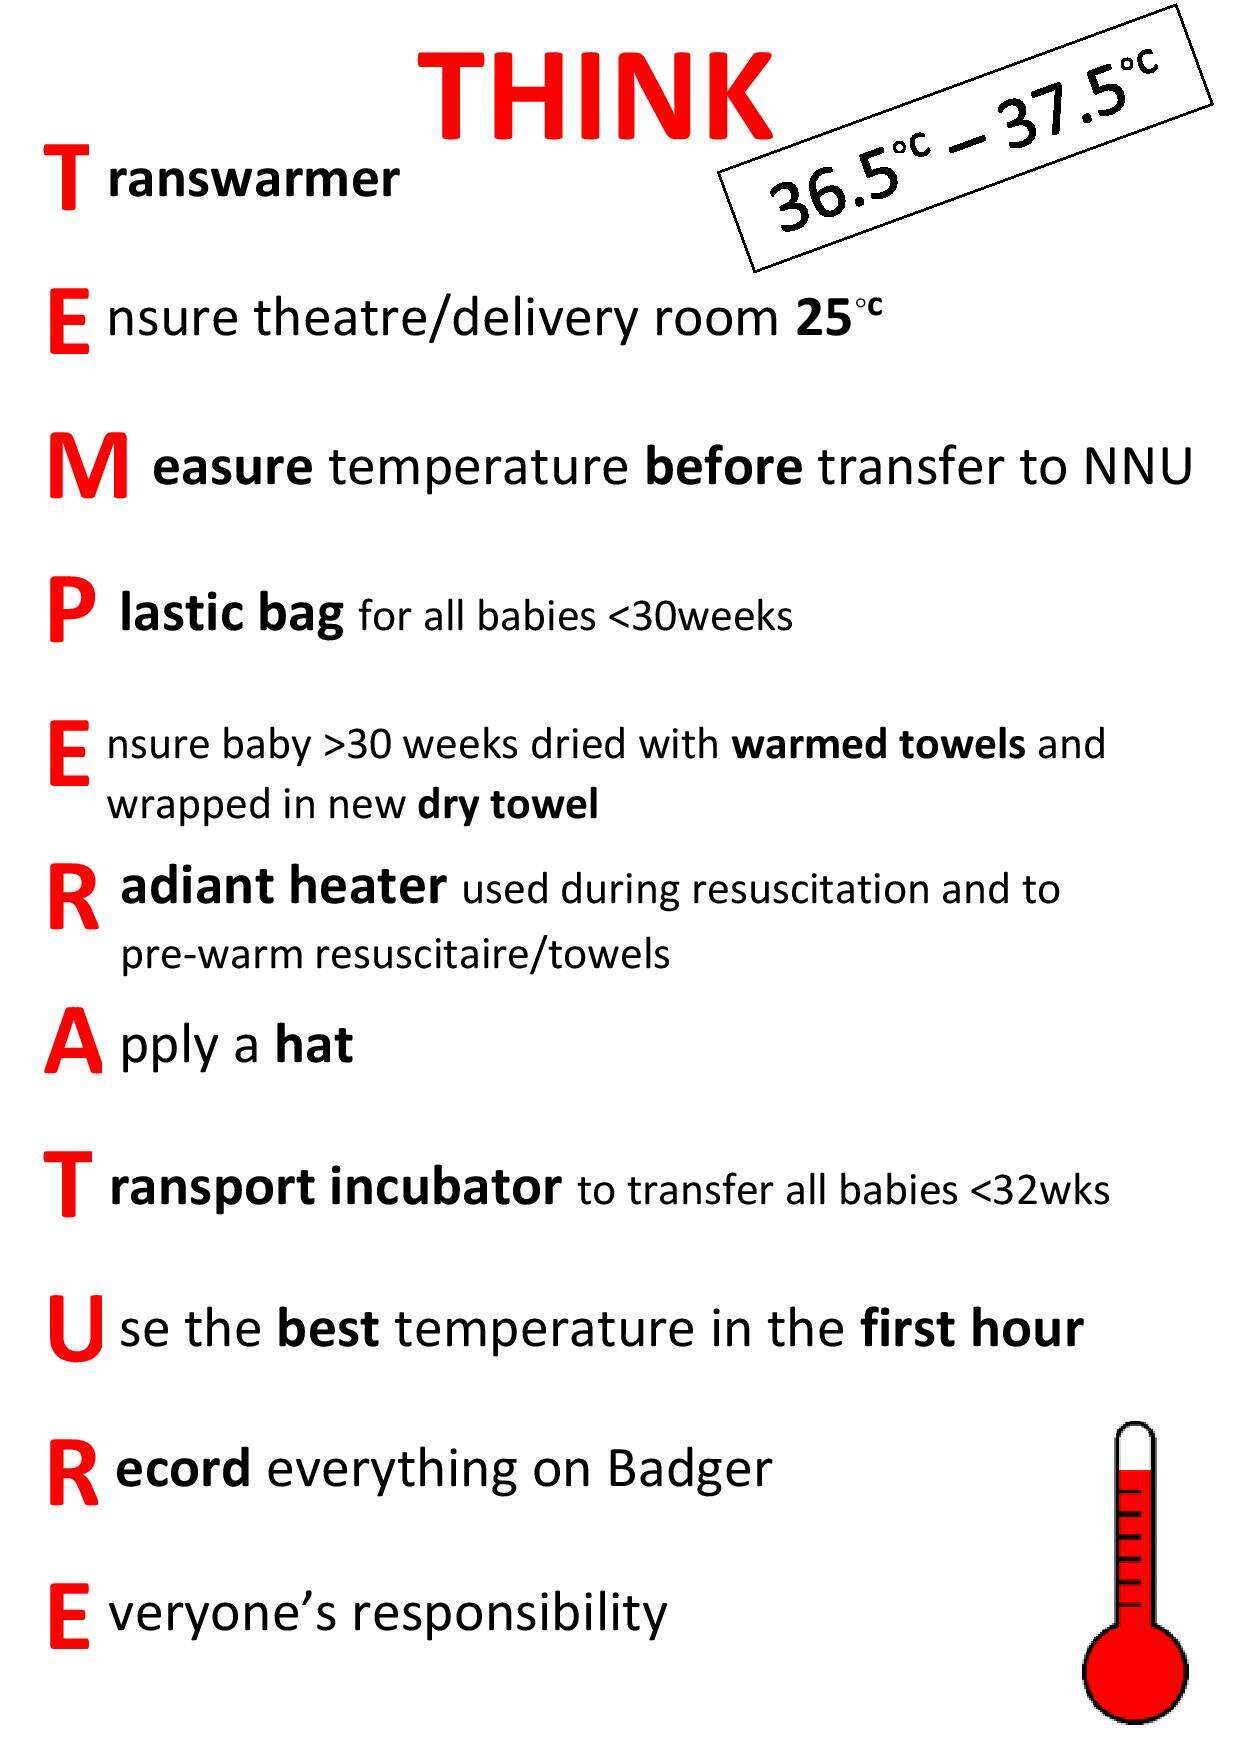 Figure 1 - Poster - Maintaining Temperature of Preterm Infants Following Delivery